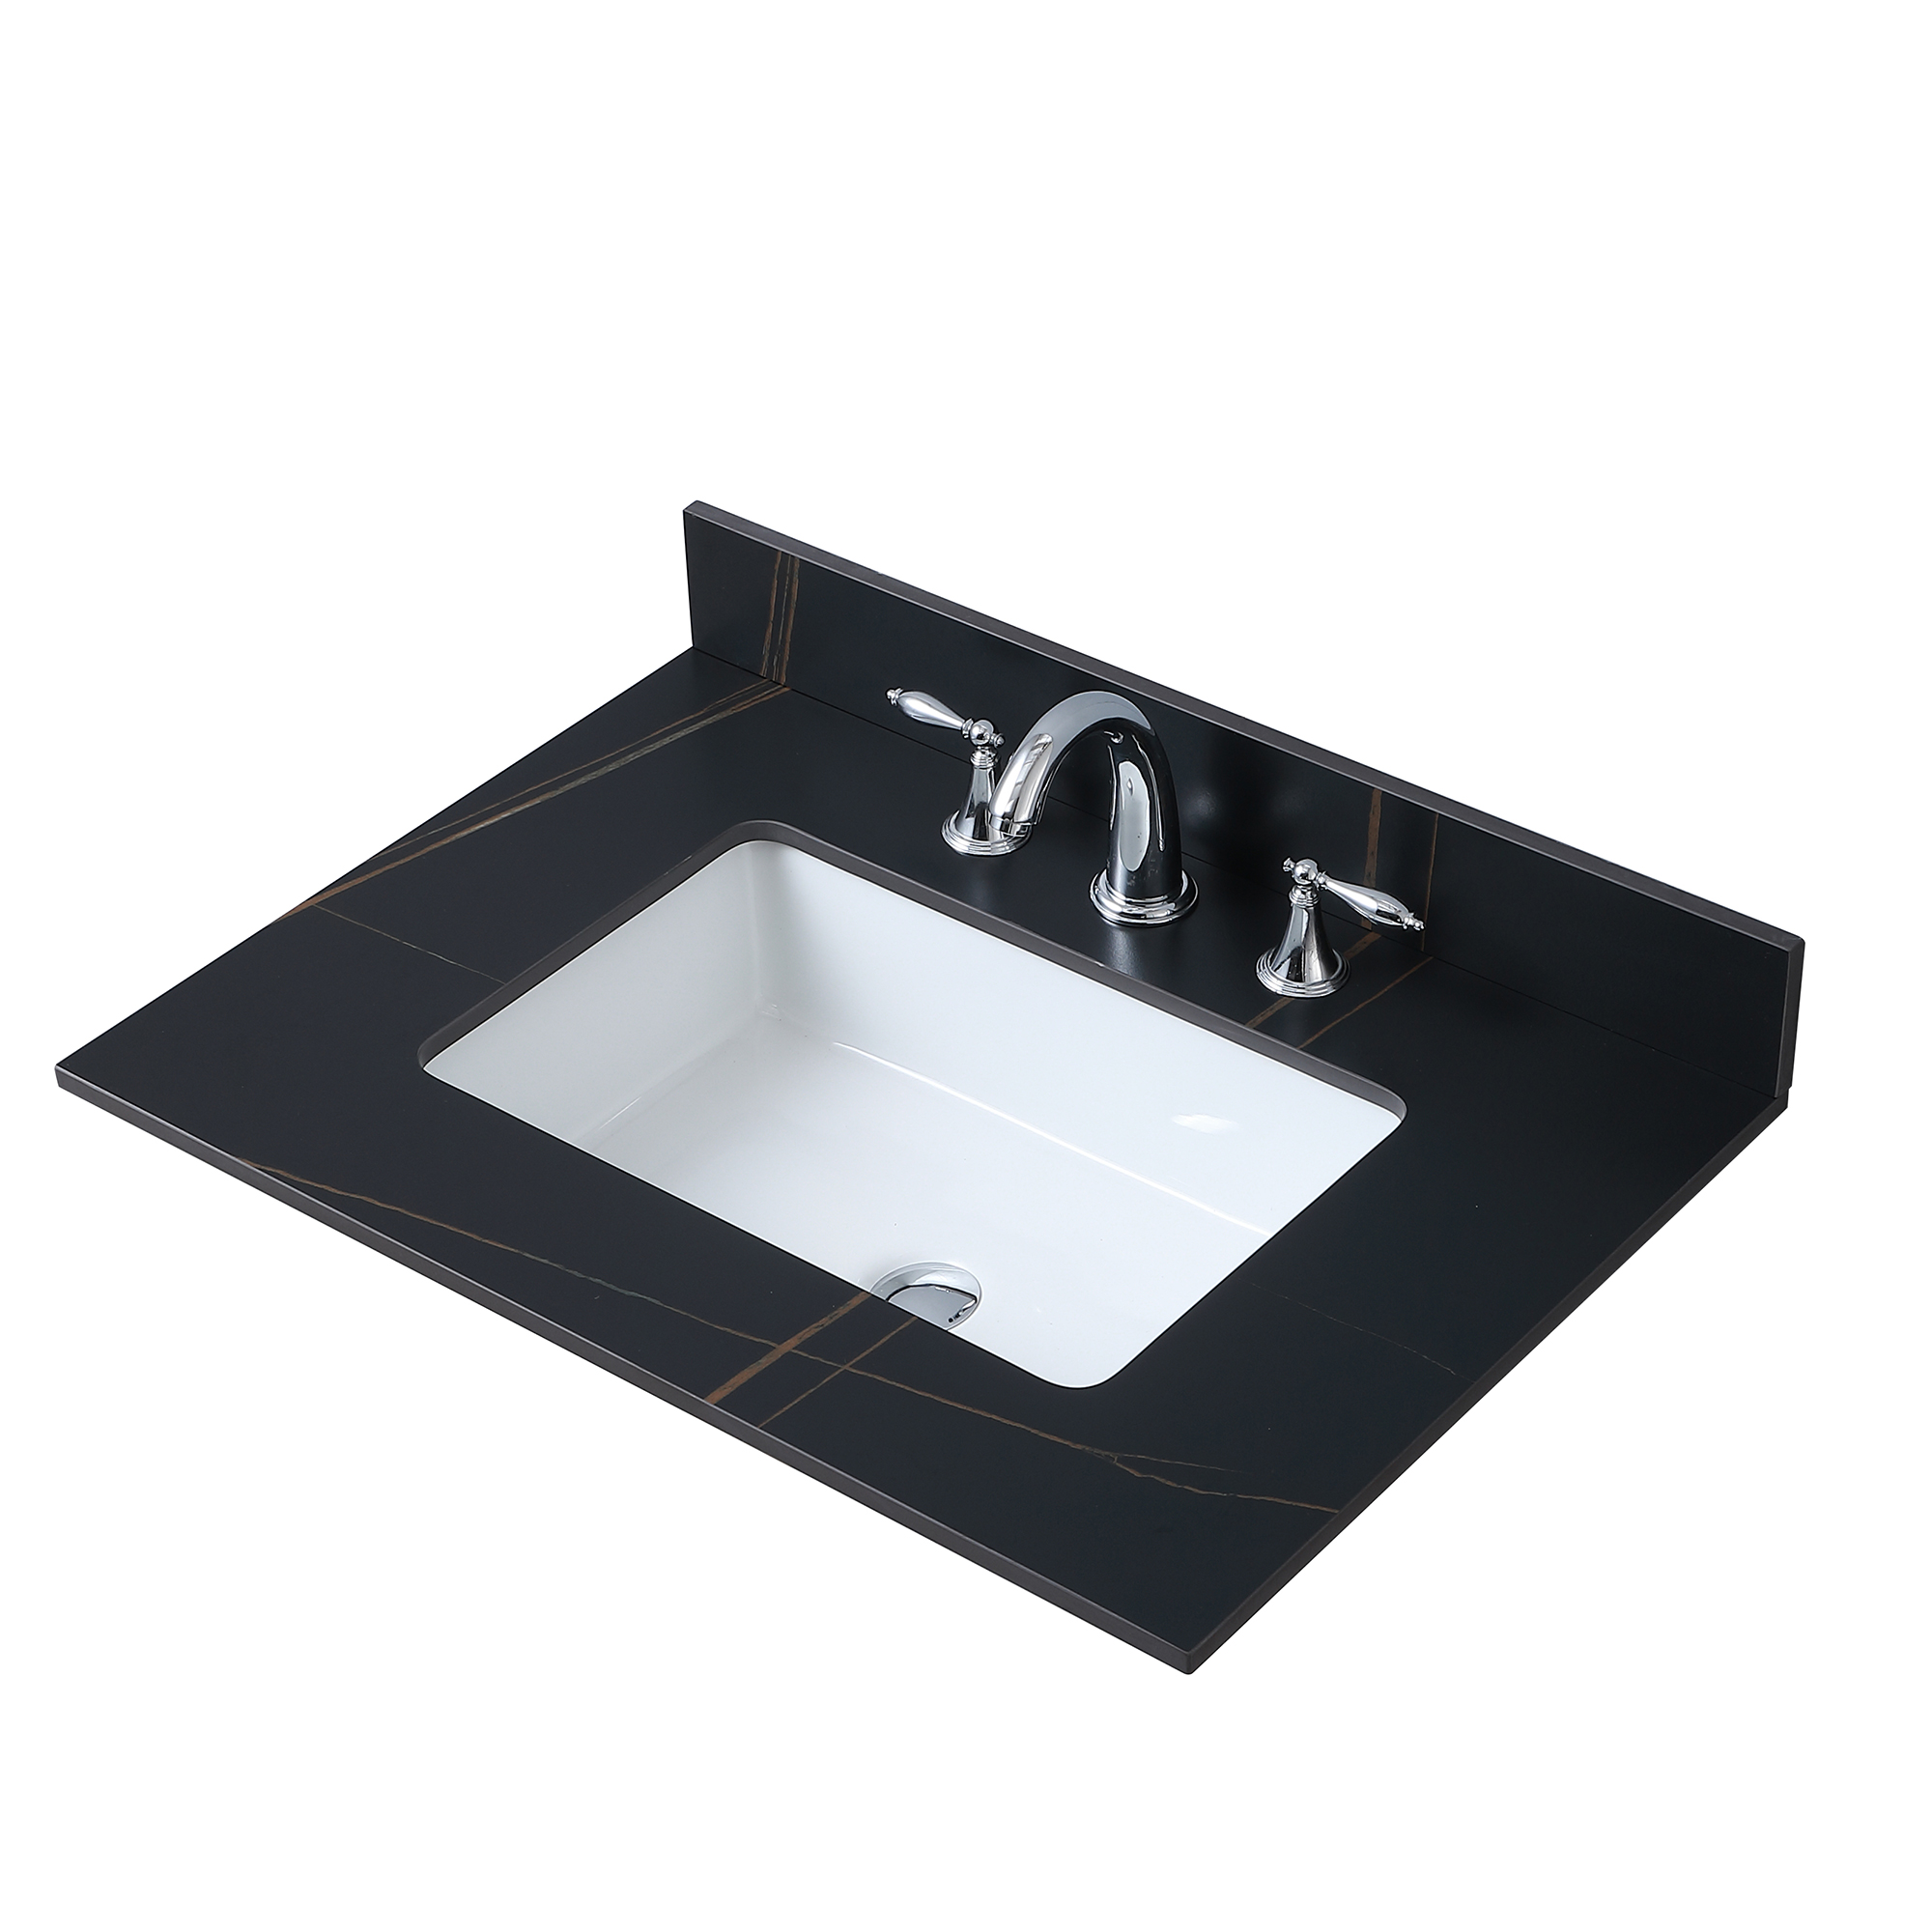 Montary 31" Sintered Stone Bathroom Vanity Top in Black Gold Color with Undermount Ceramic Sink and Three Faucet Hole with Backsplash